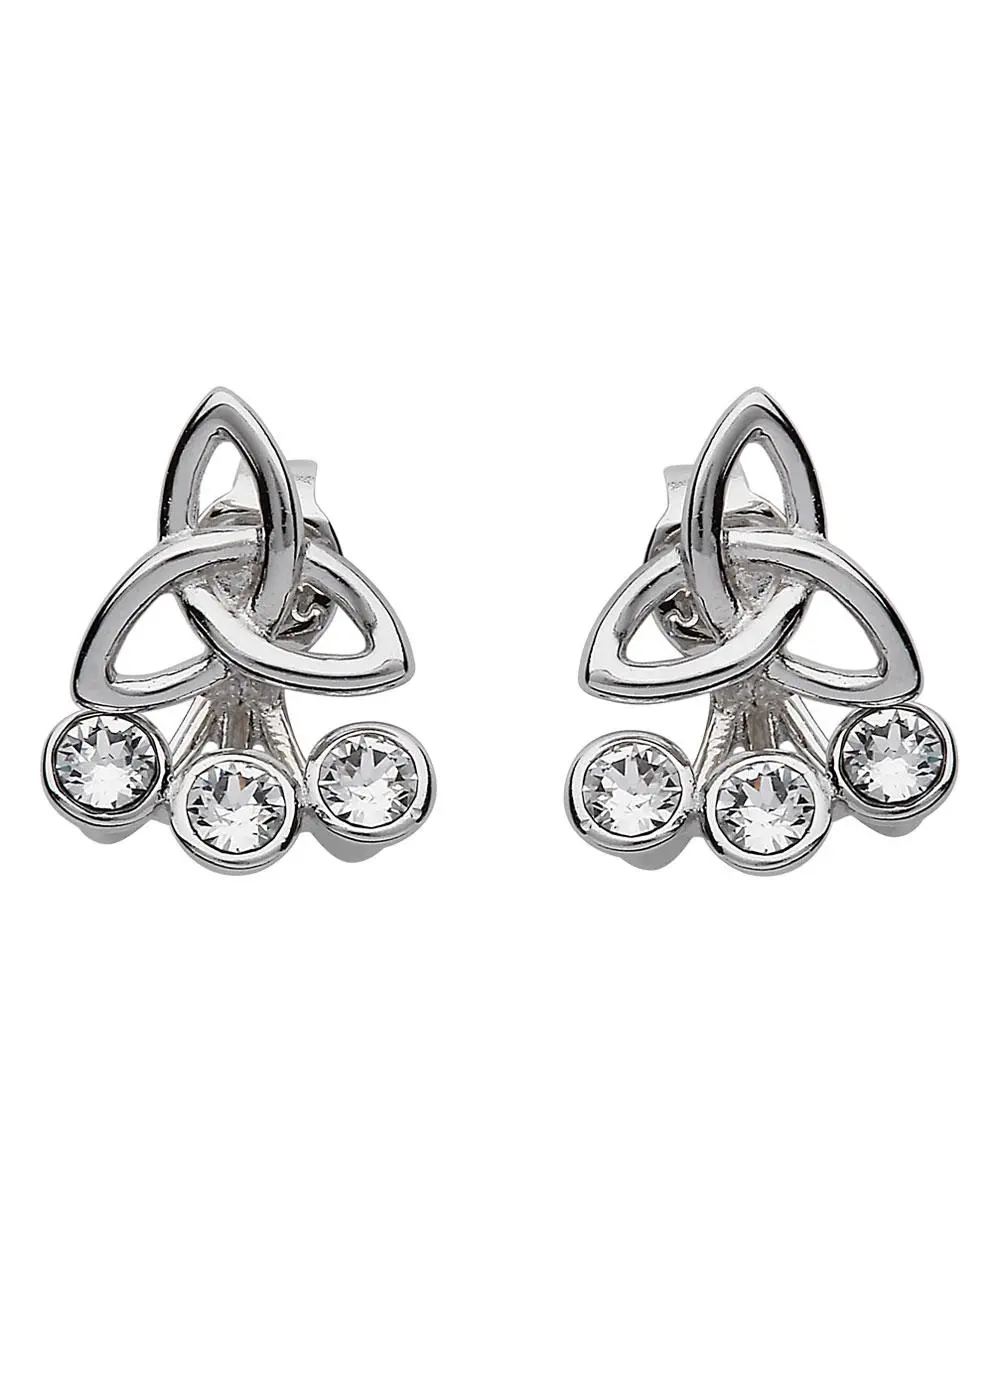 American Beauty FrontBack Small Earrings with Diamond Clusters in 18K  White Gold  Kwiat